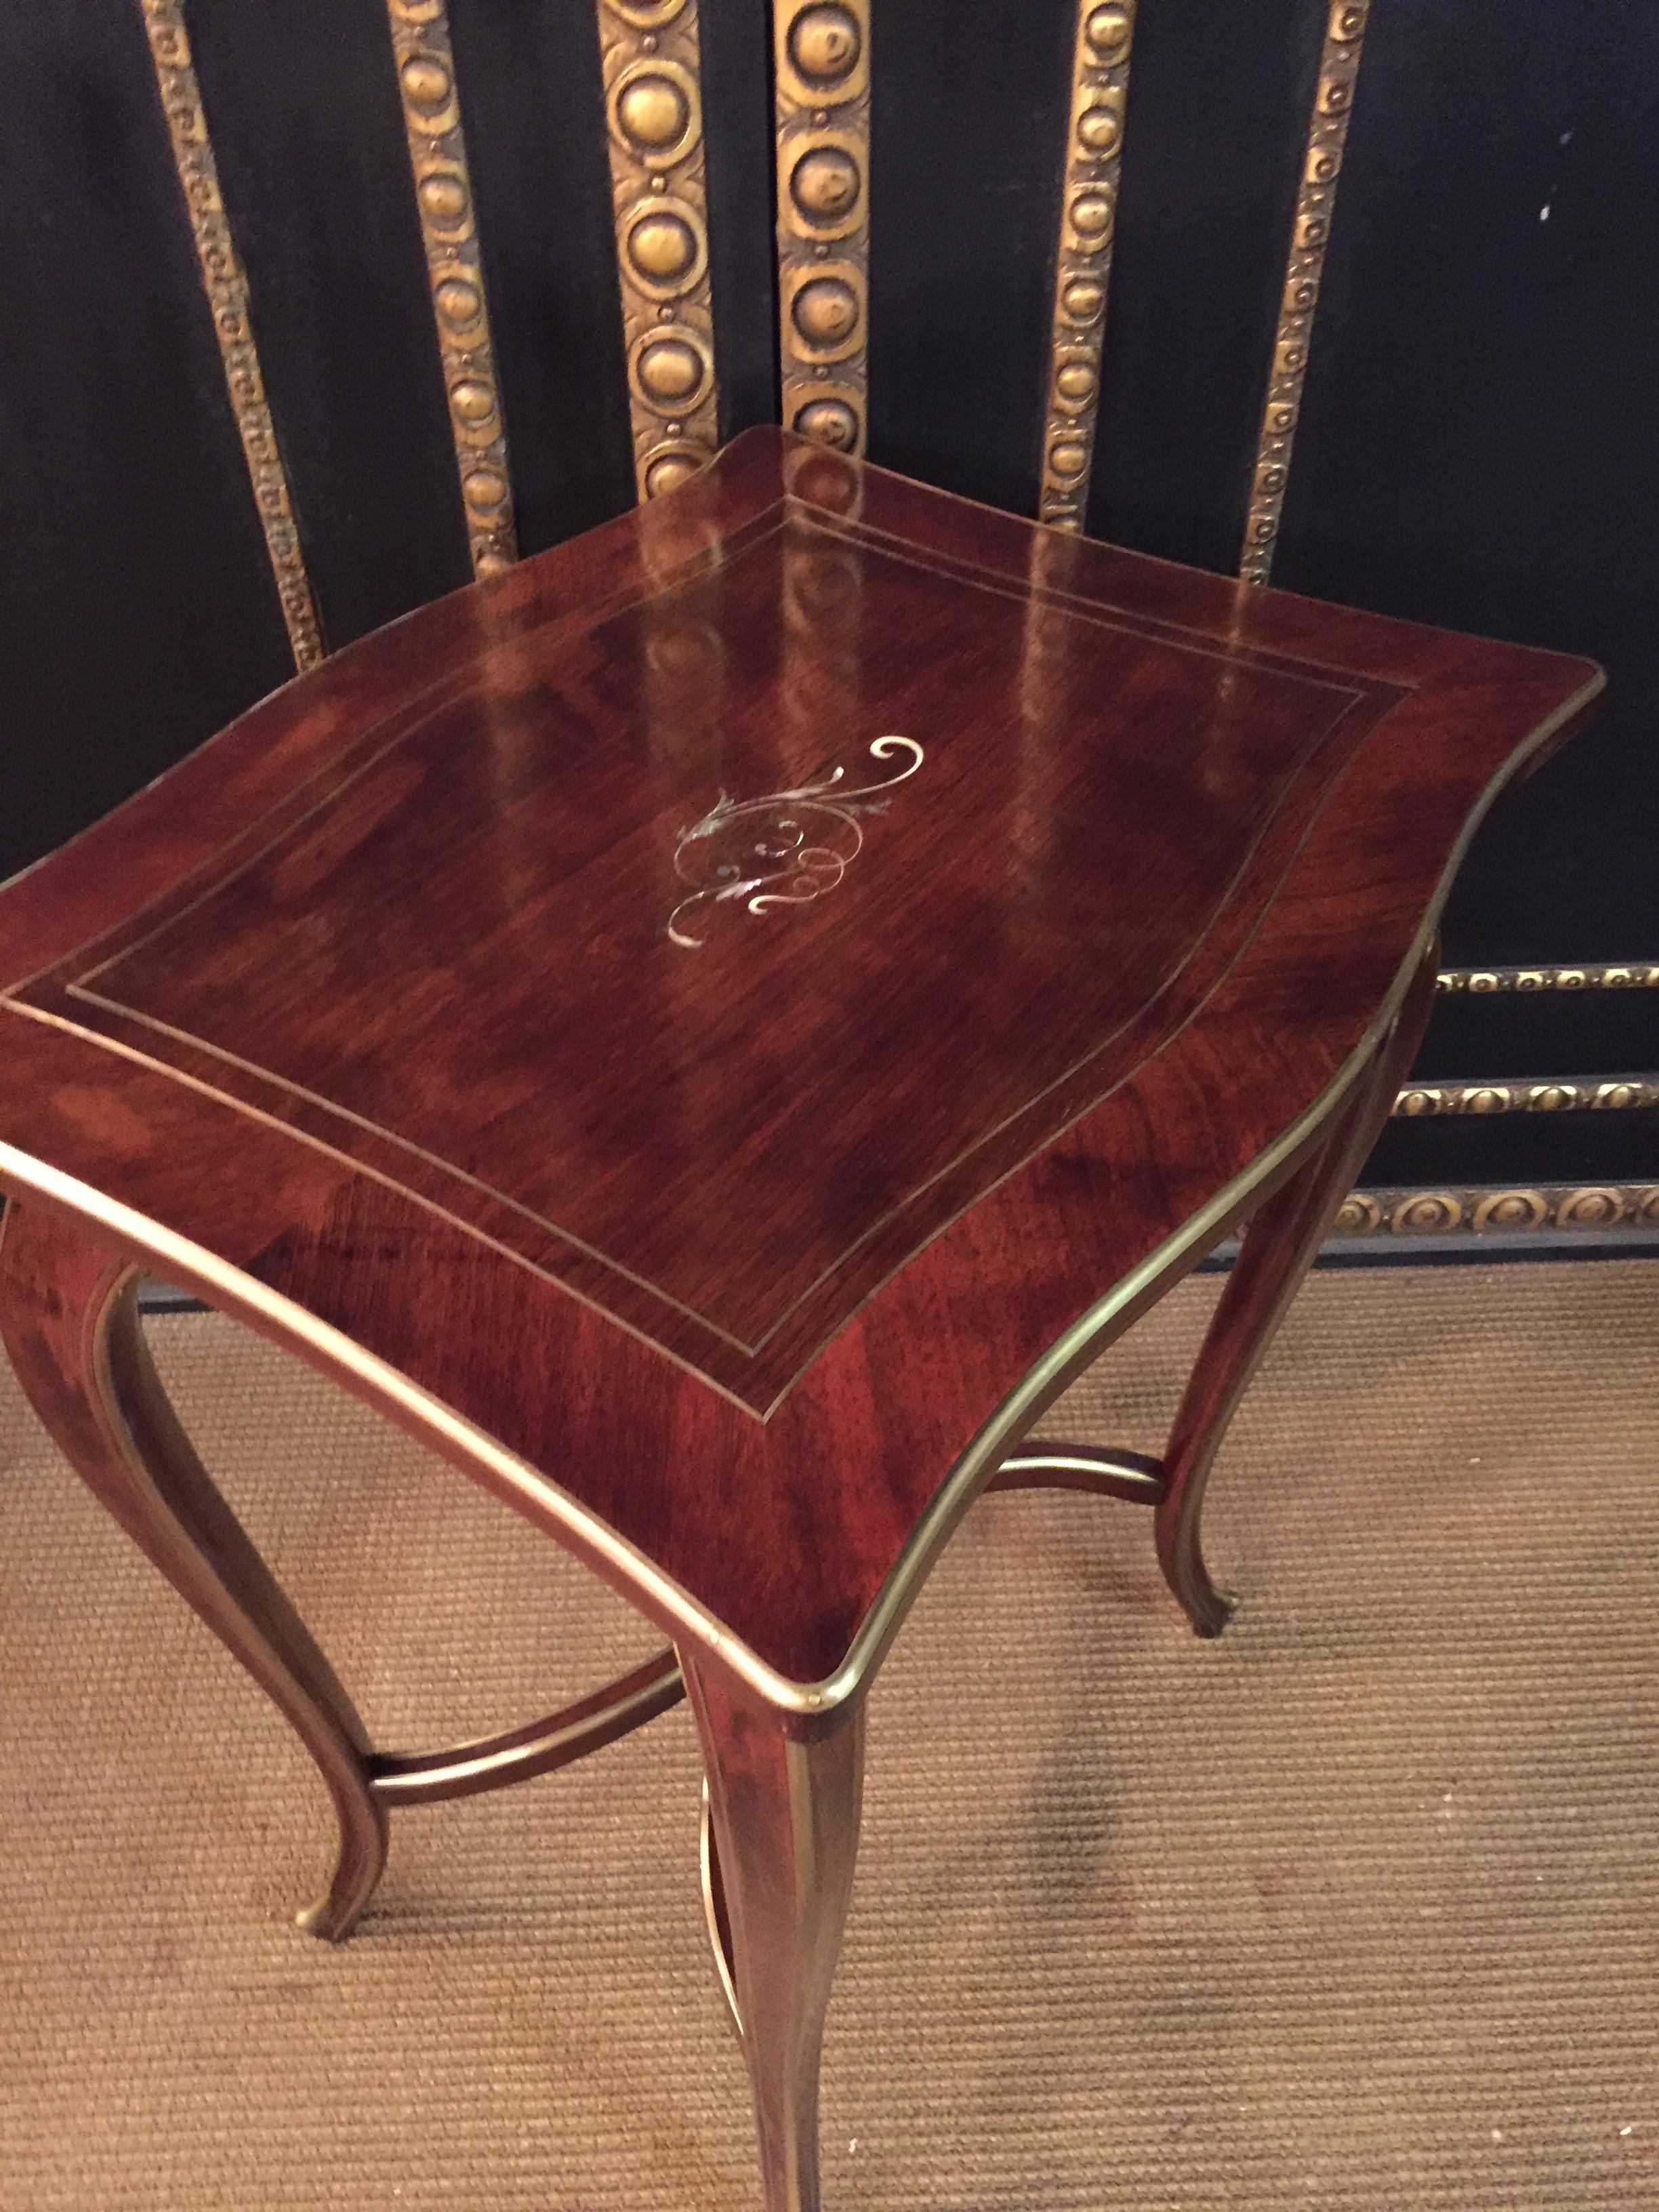 Antique Biedermeier Table Mahogany Inlaid with Mother Pearl 1870 7